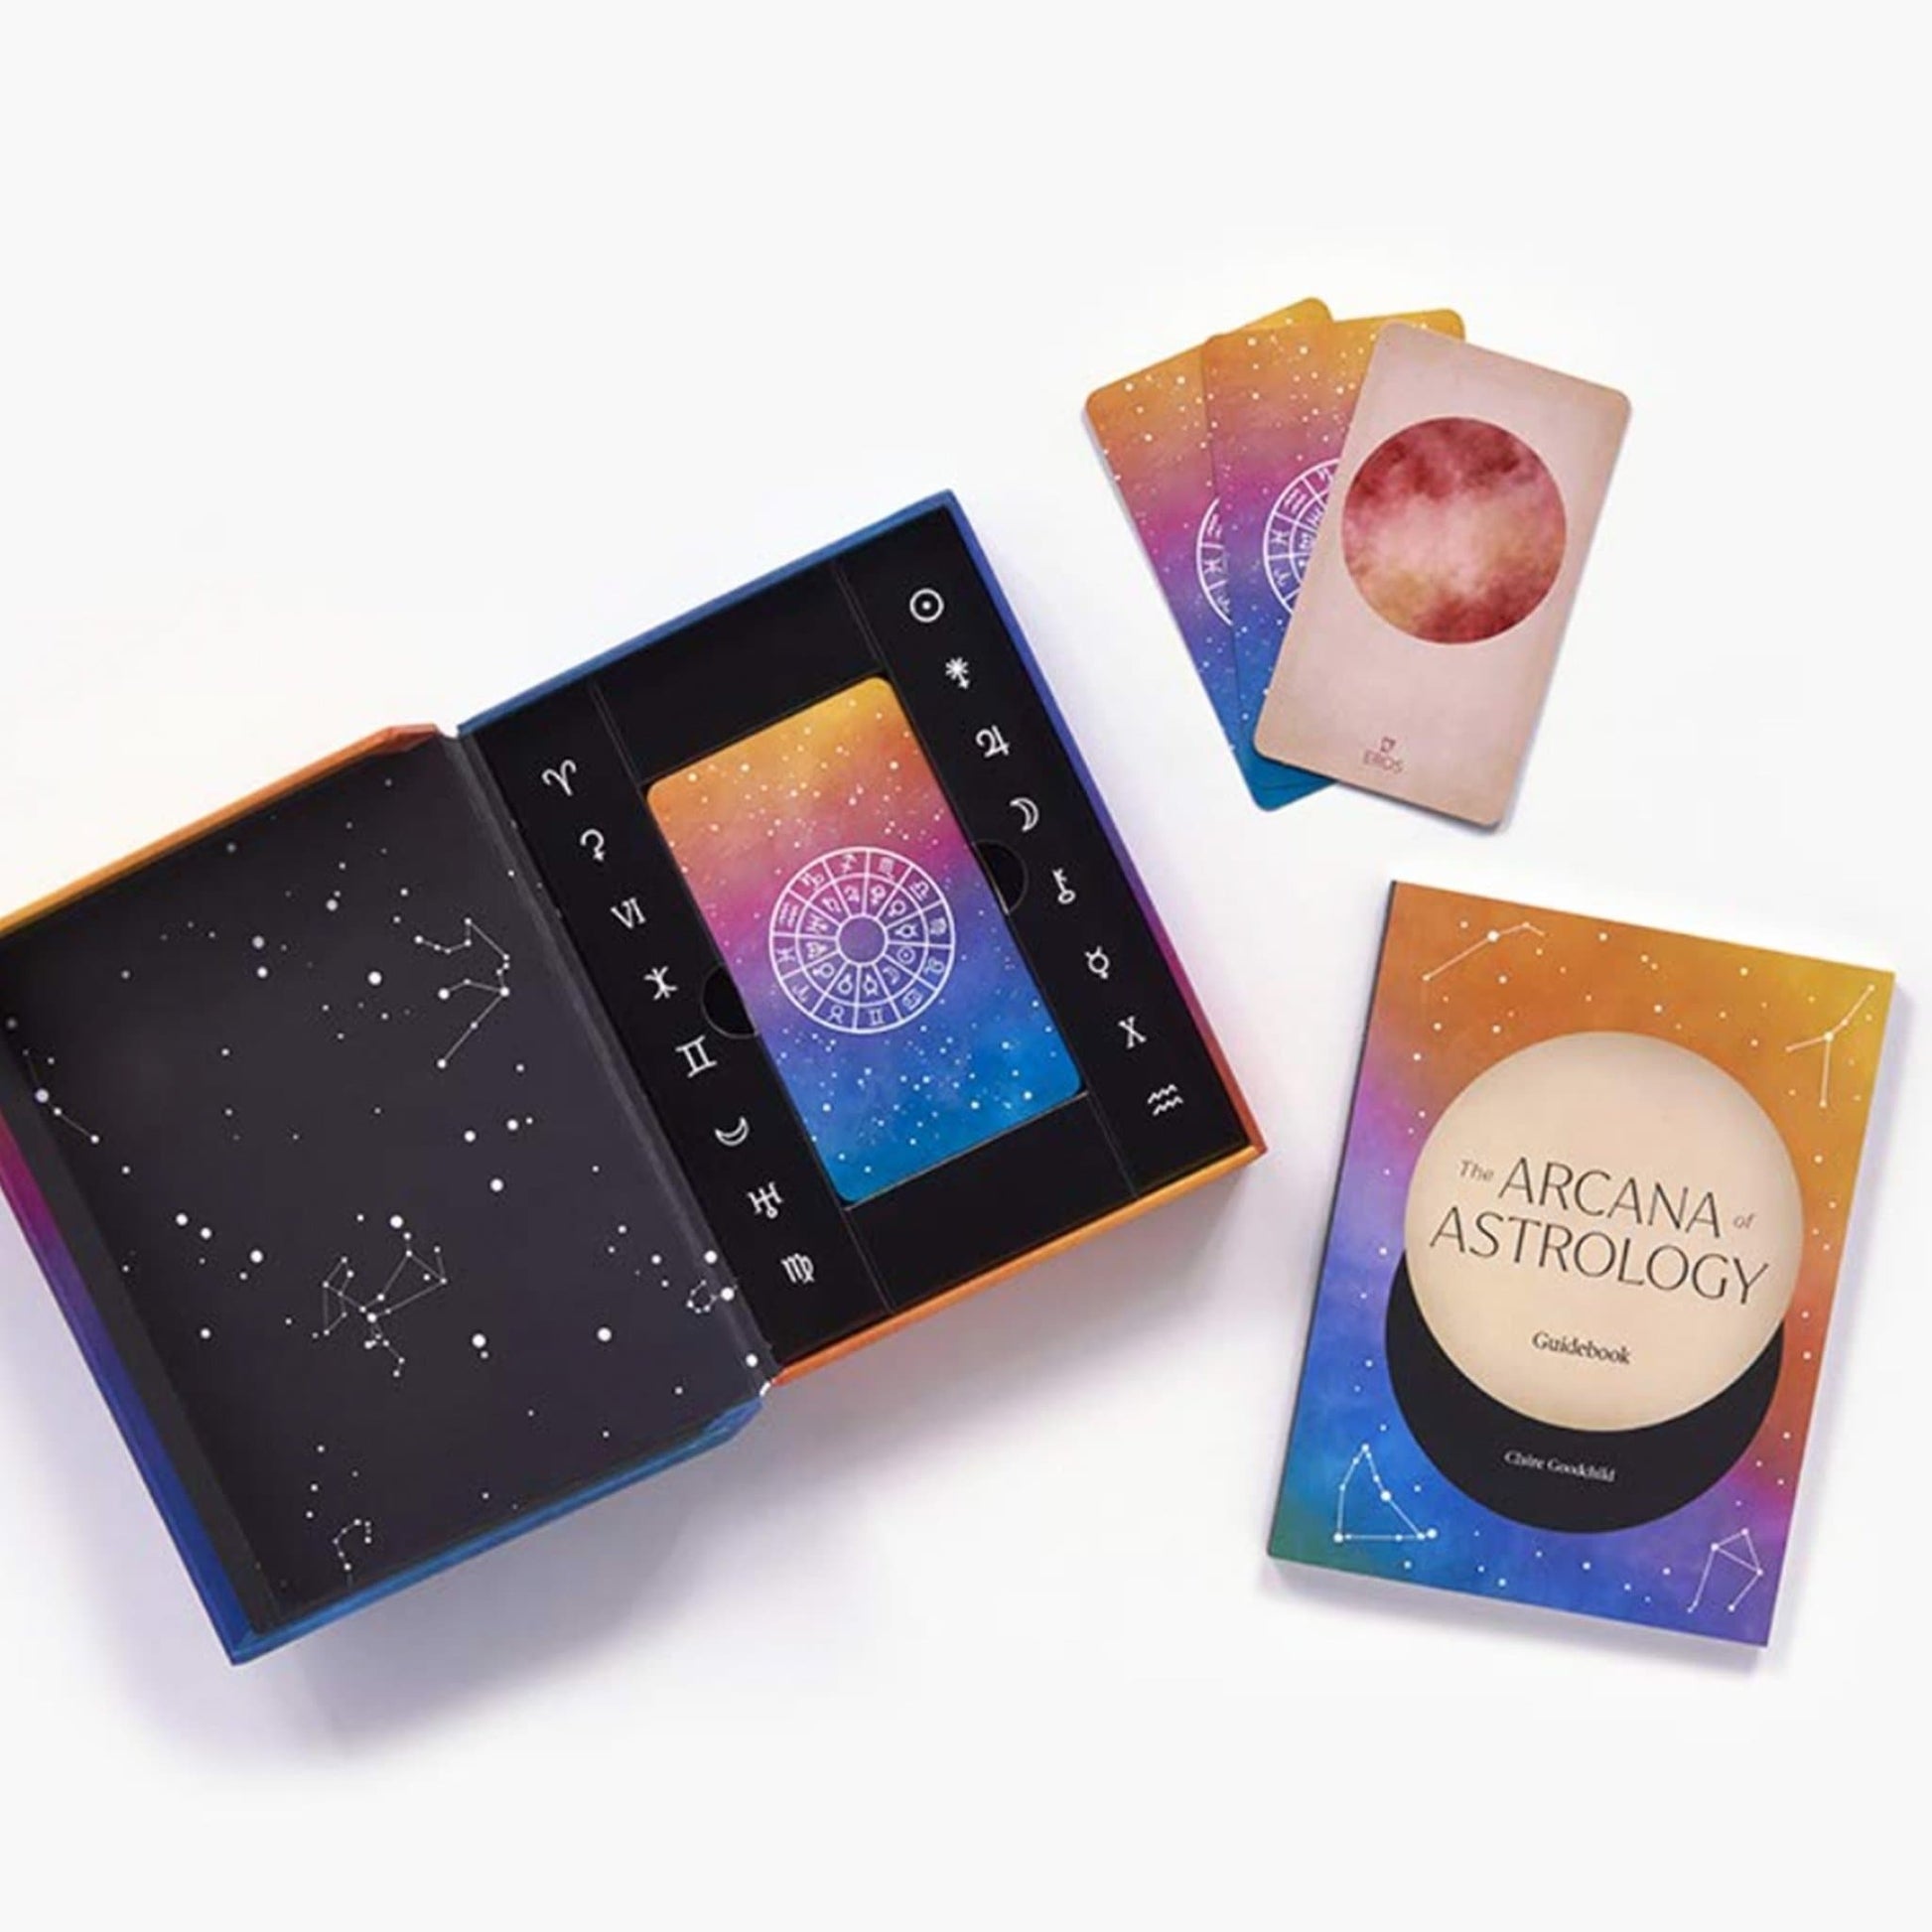 Arcana of Astrology Boxed Set: Oracle Deck and Guidebook for Cosmic Insight - Muse + Moonstone